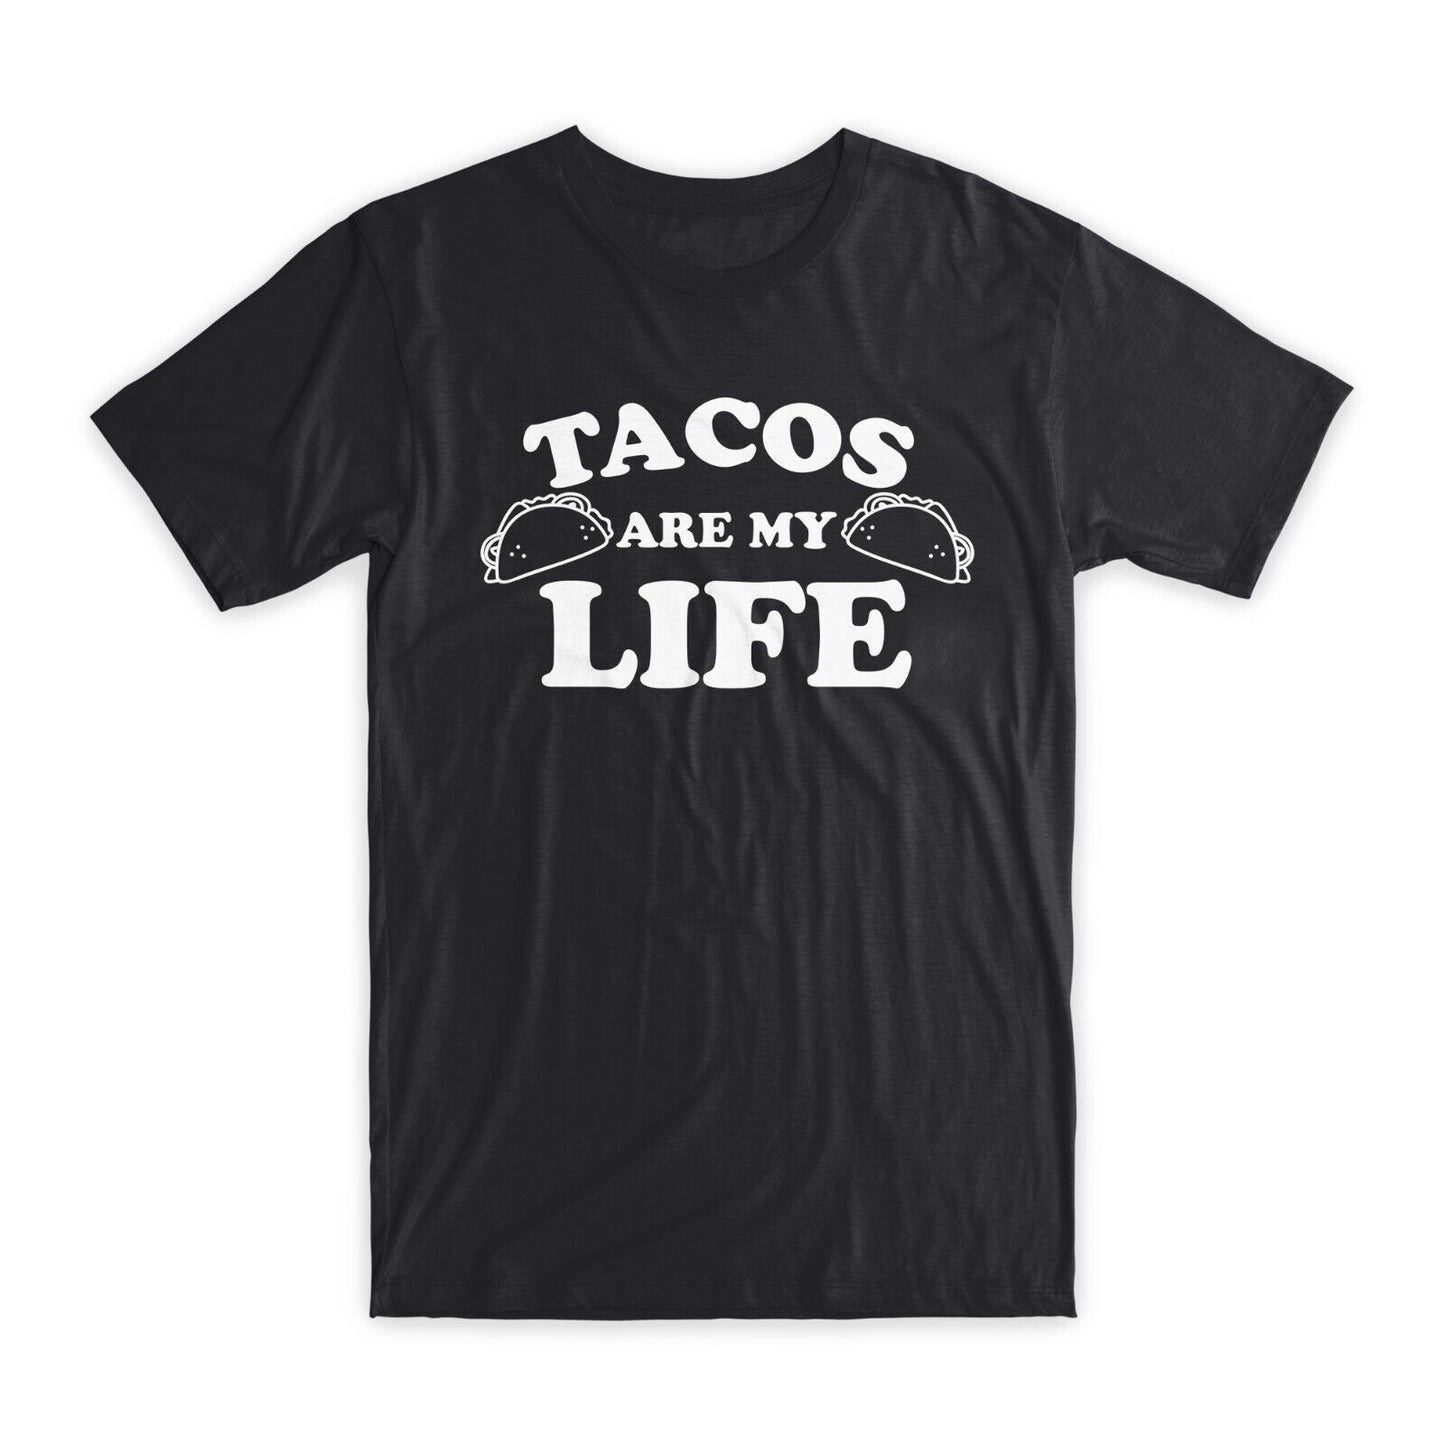 Tacos Are My Life Print T-Shirt Premium Soft Cotton Crew Neck Funny Tee Gift NEW